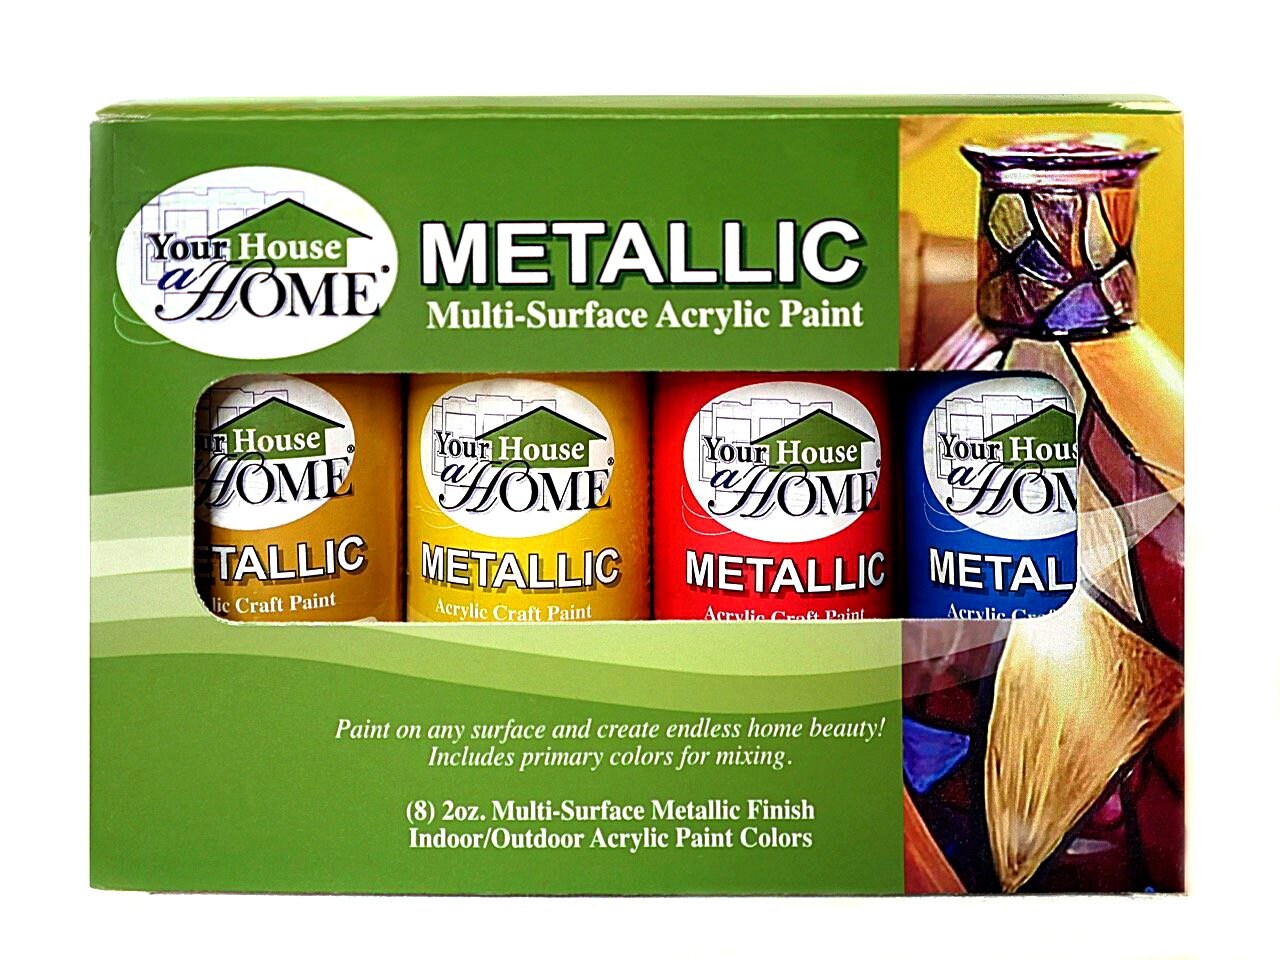 Metallic Multi-Surface Acrylic Craft Paint Set of 8, Great for  indoor/outdoor use and great for all surfaces including Paper, Canvas,  Wood, Metal, Plaster, Plastic, Fabric, Glass, and Ceramics!